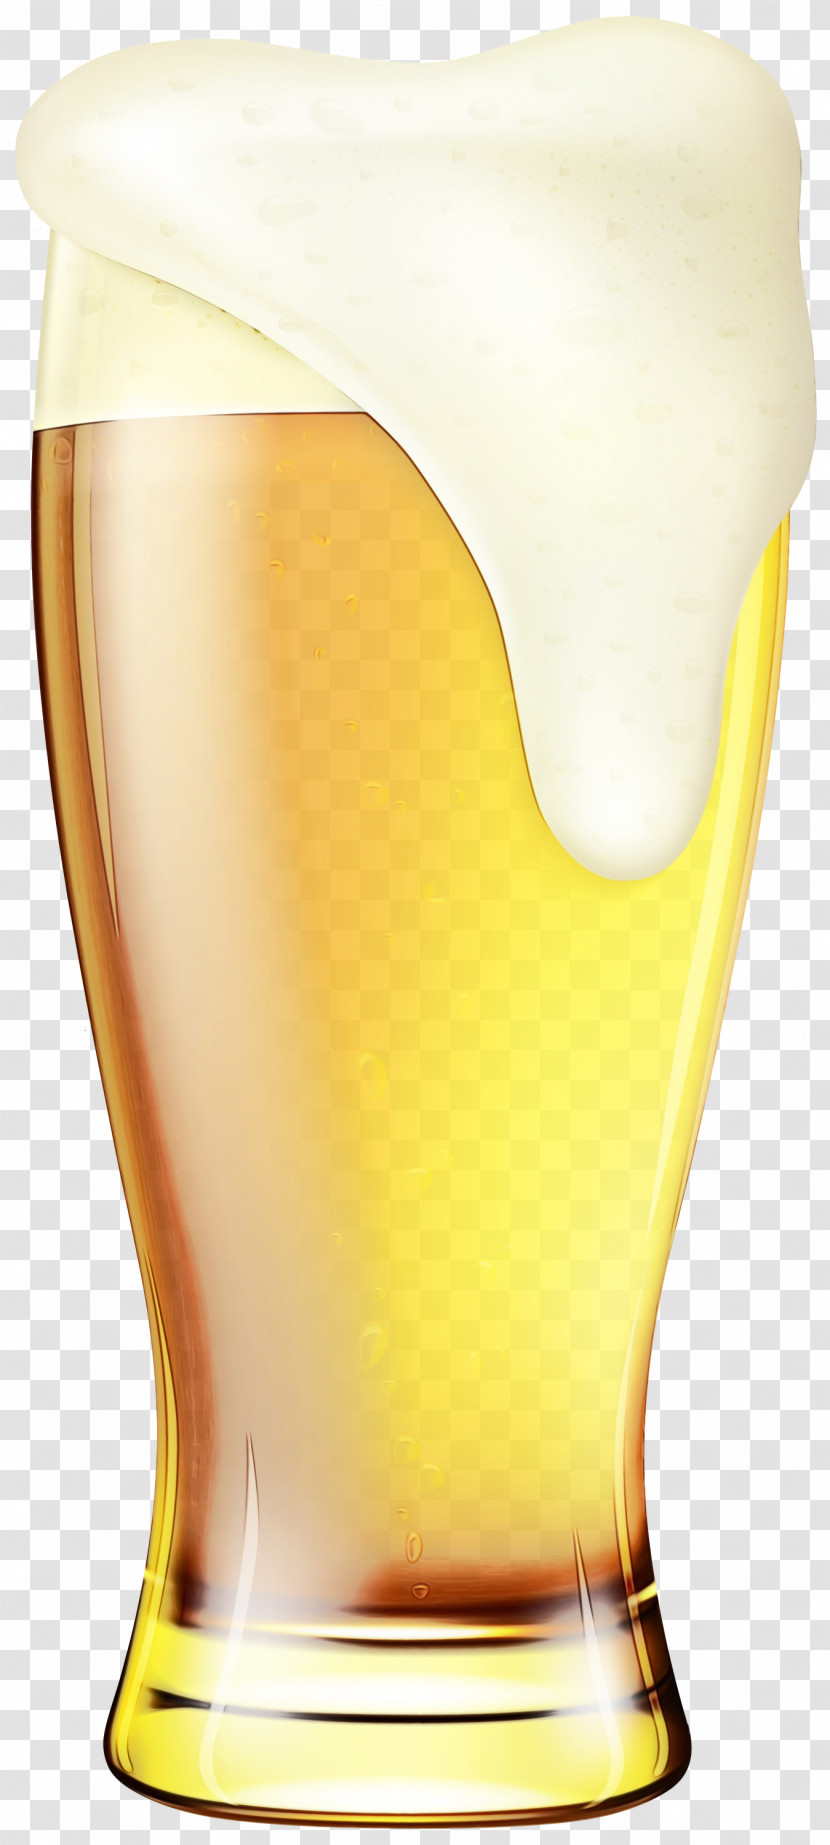 Beer Glass Pint Glass Pint Glass Yellow Transparent PNG